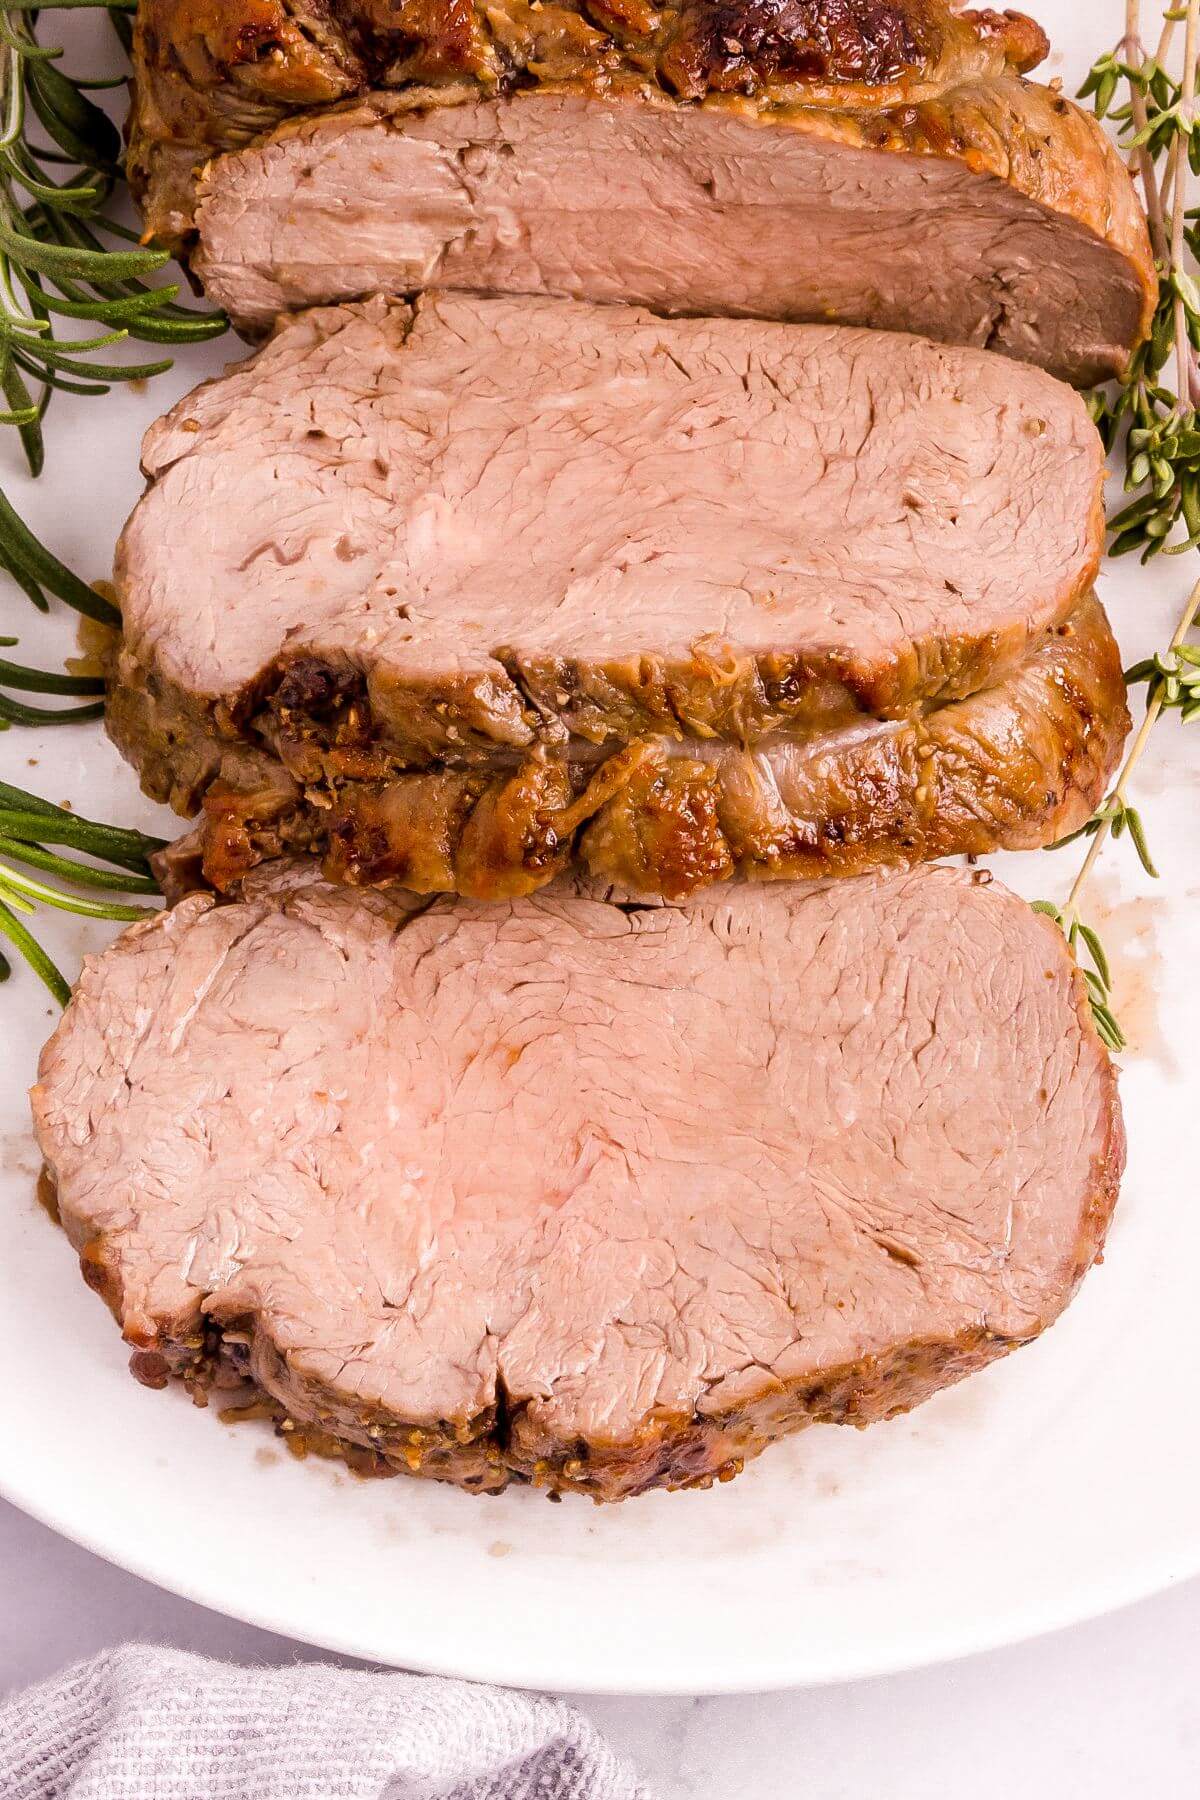 Pieces of beef are on a plate next to rosemary.